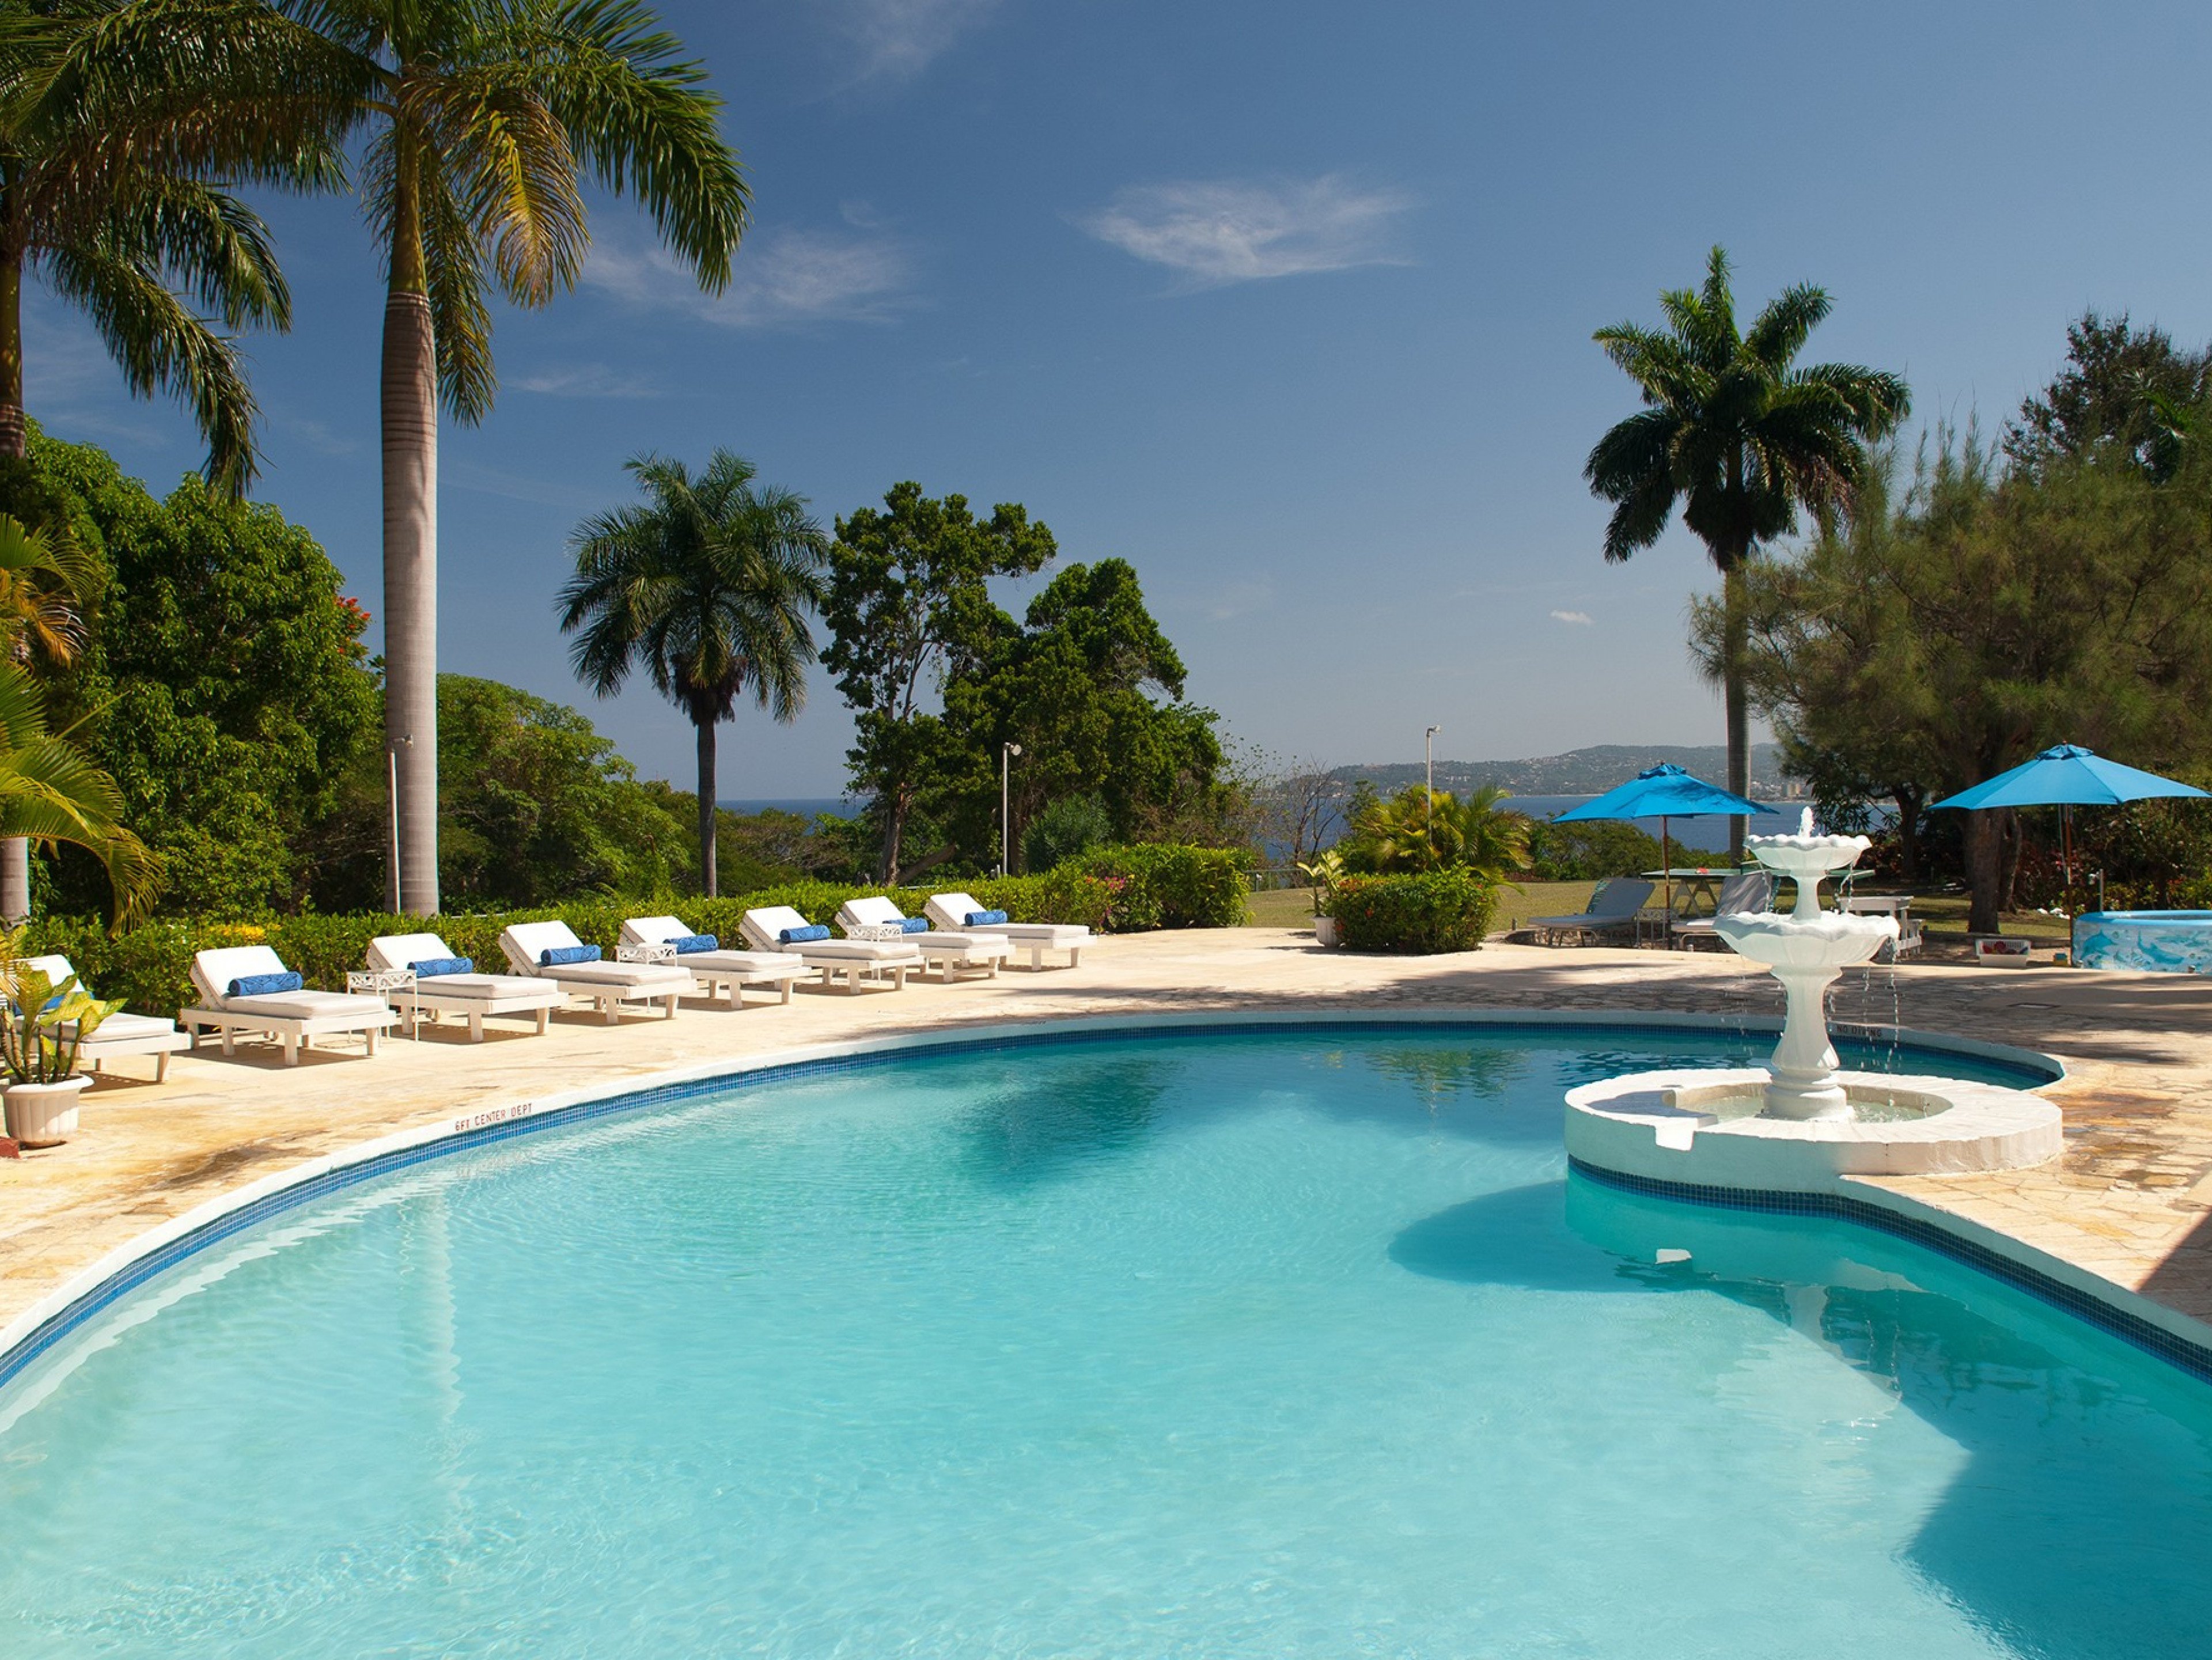 Pharos Summertime villas in Jamaica with private pools